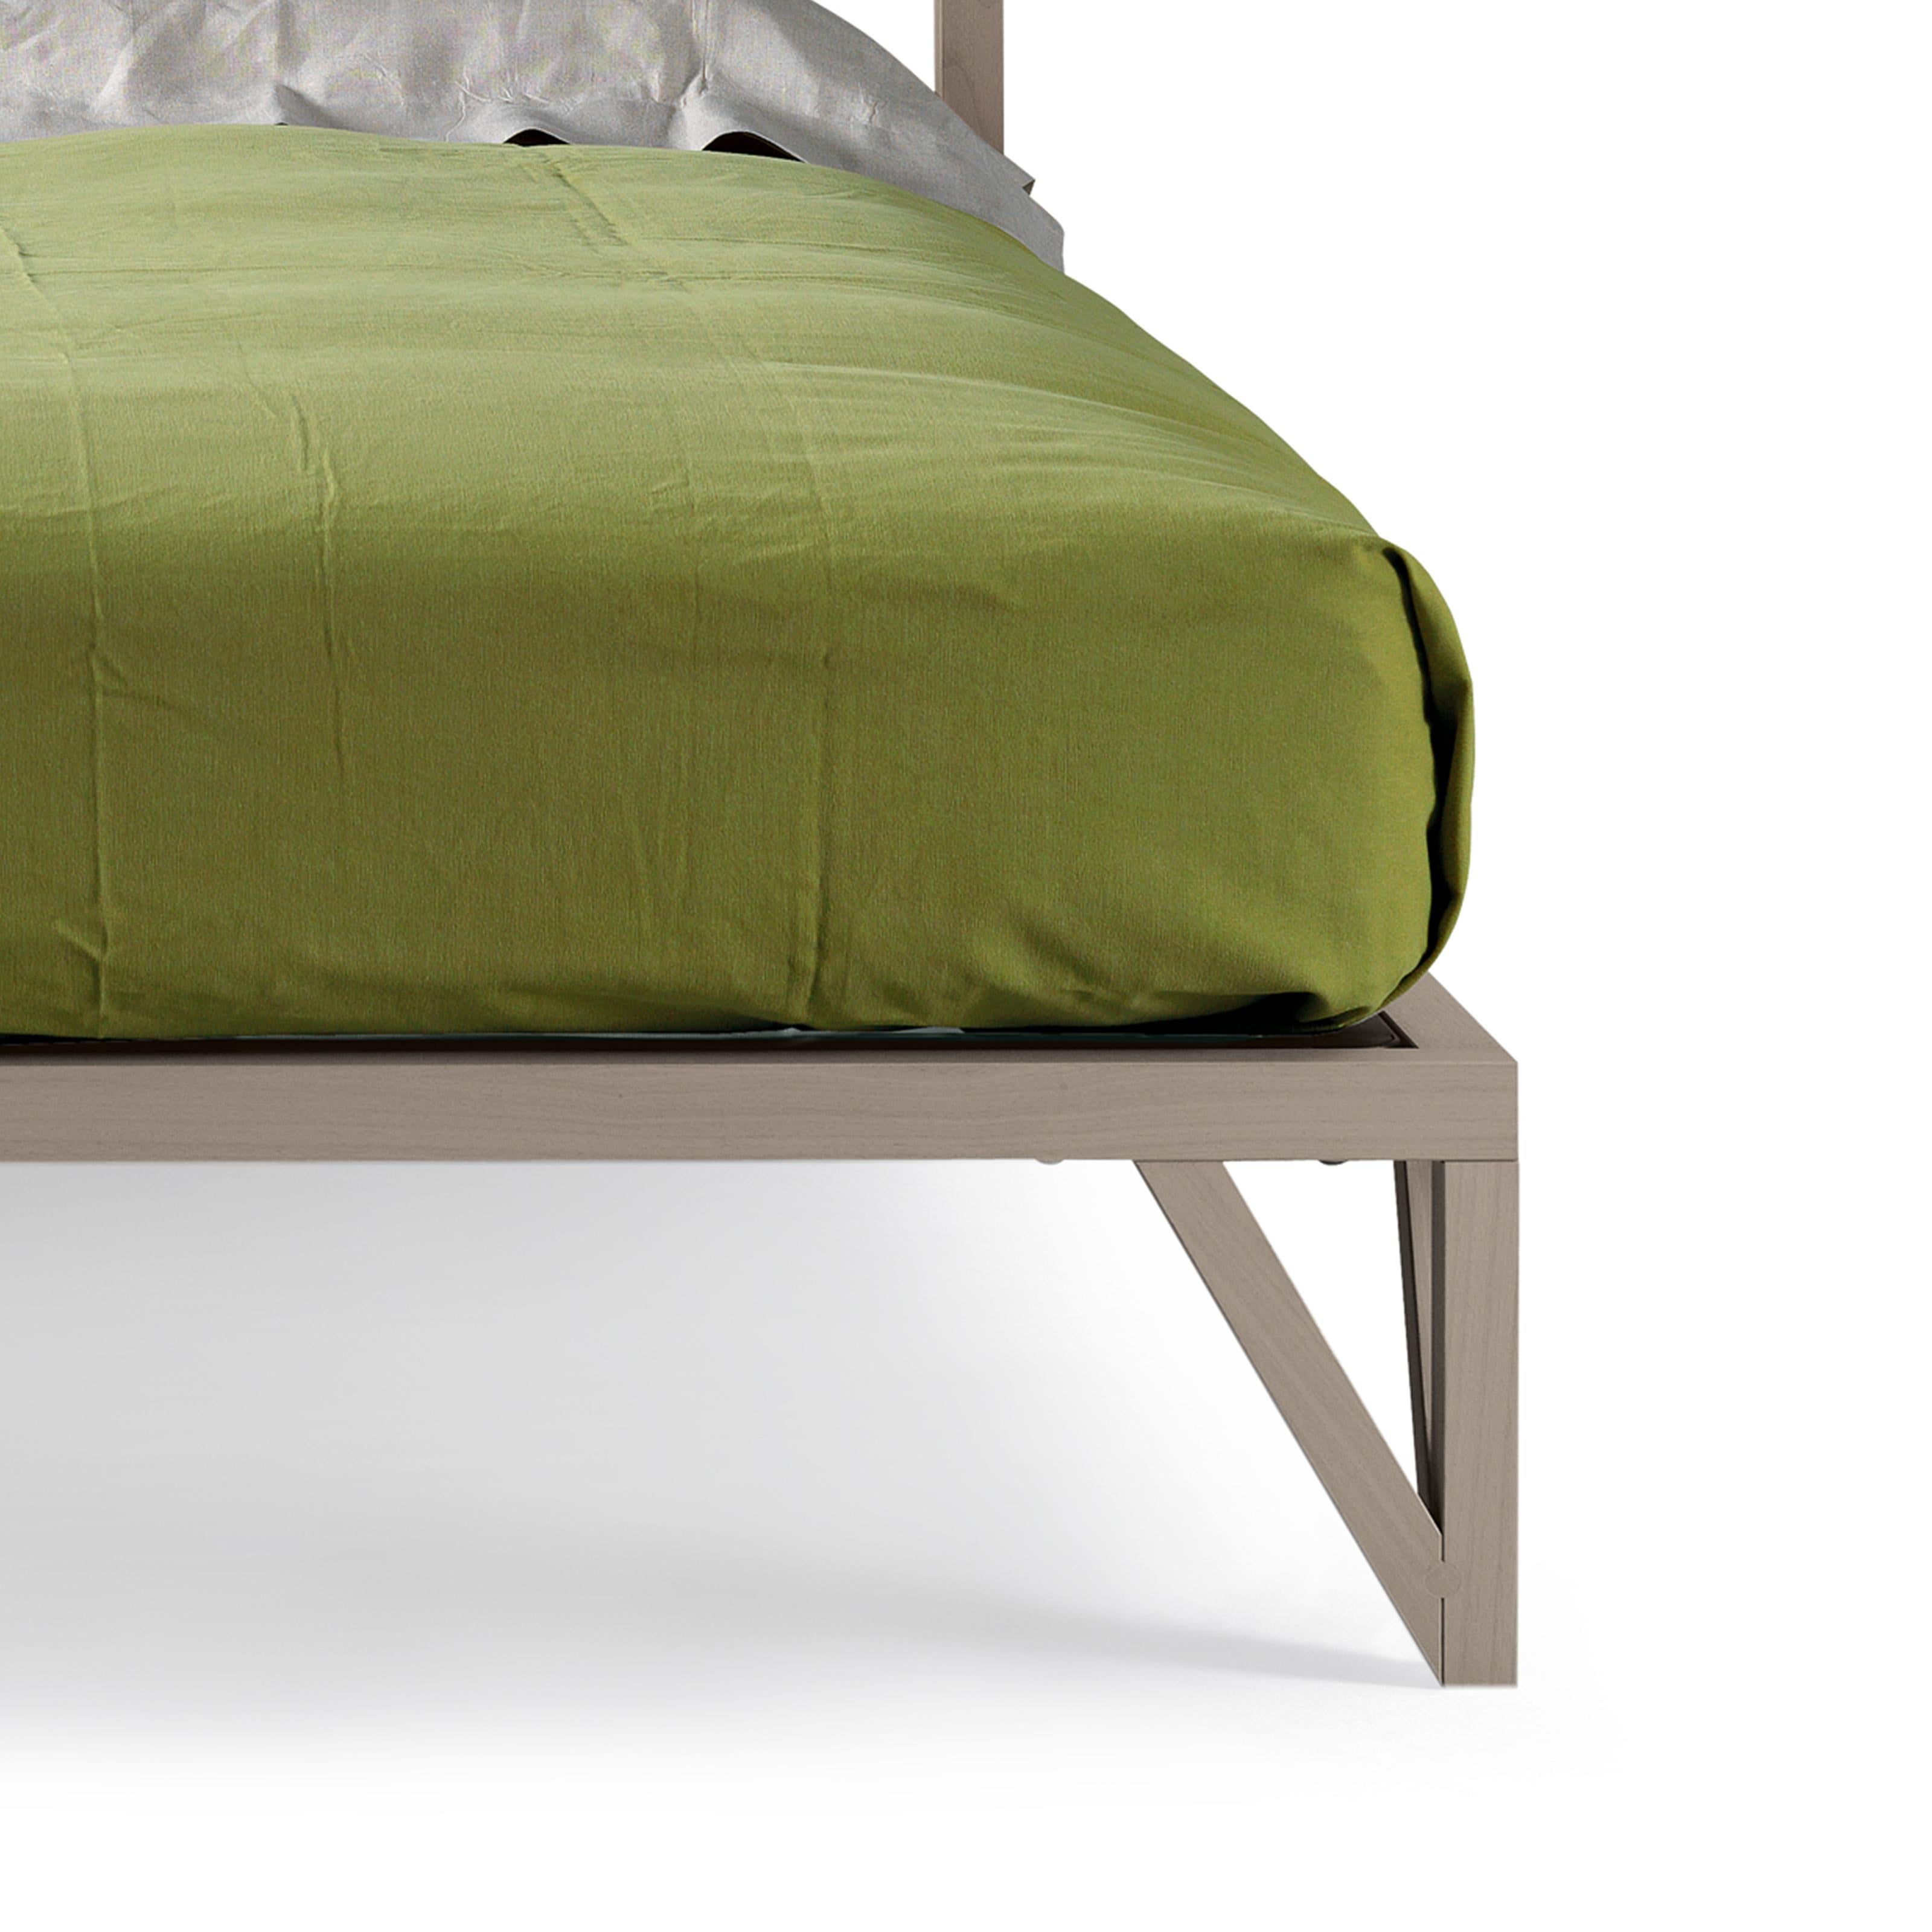 Modern Leggiadro Solid Wood Bed, Walnut in Hand-Made Natural Grey Finish, Contemporary For Sale